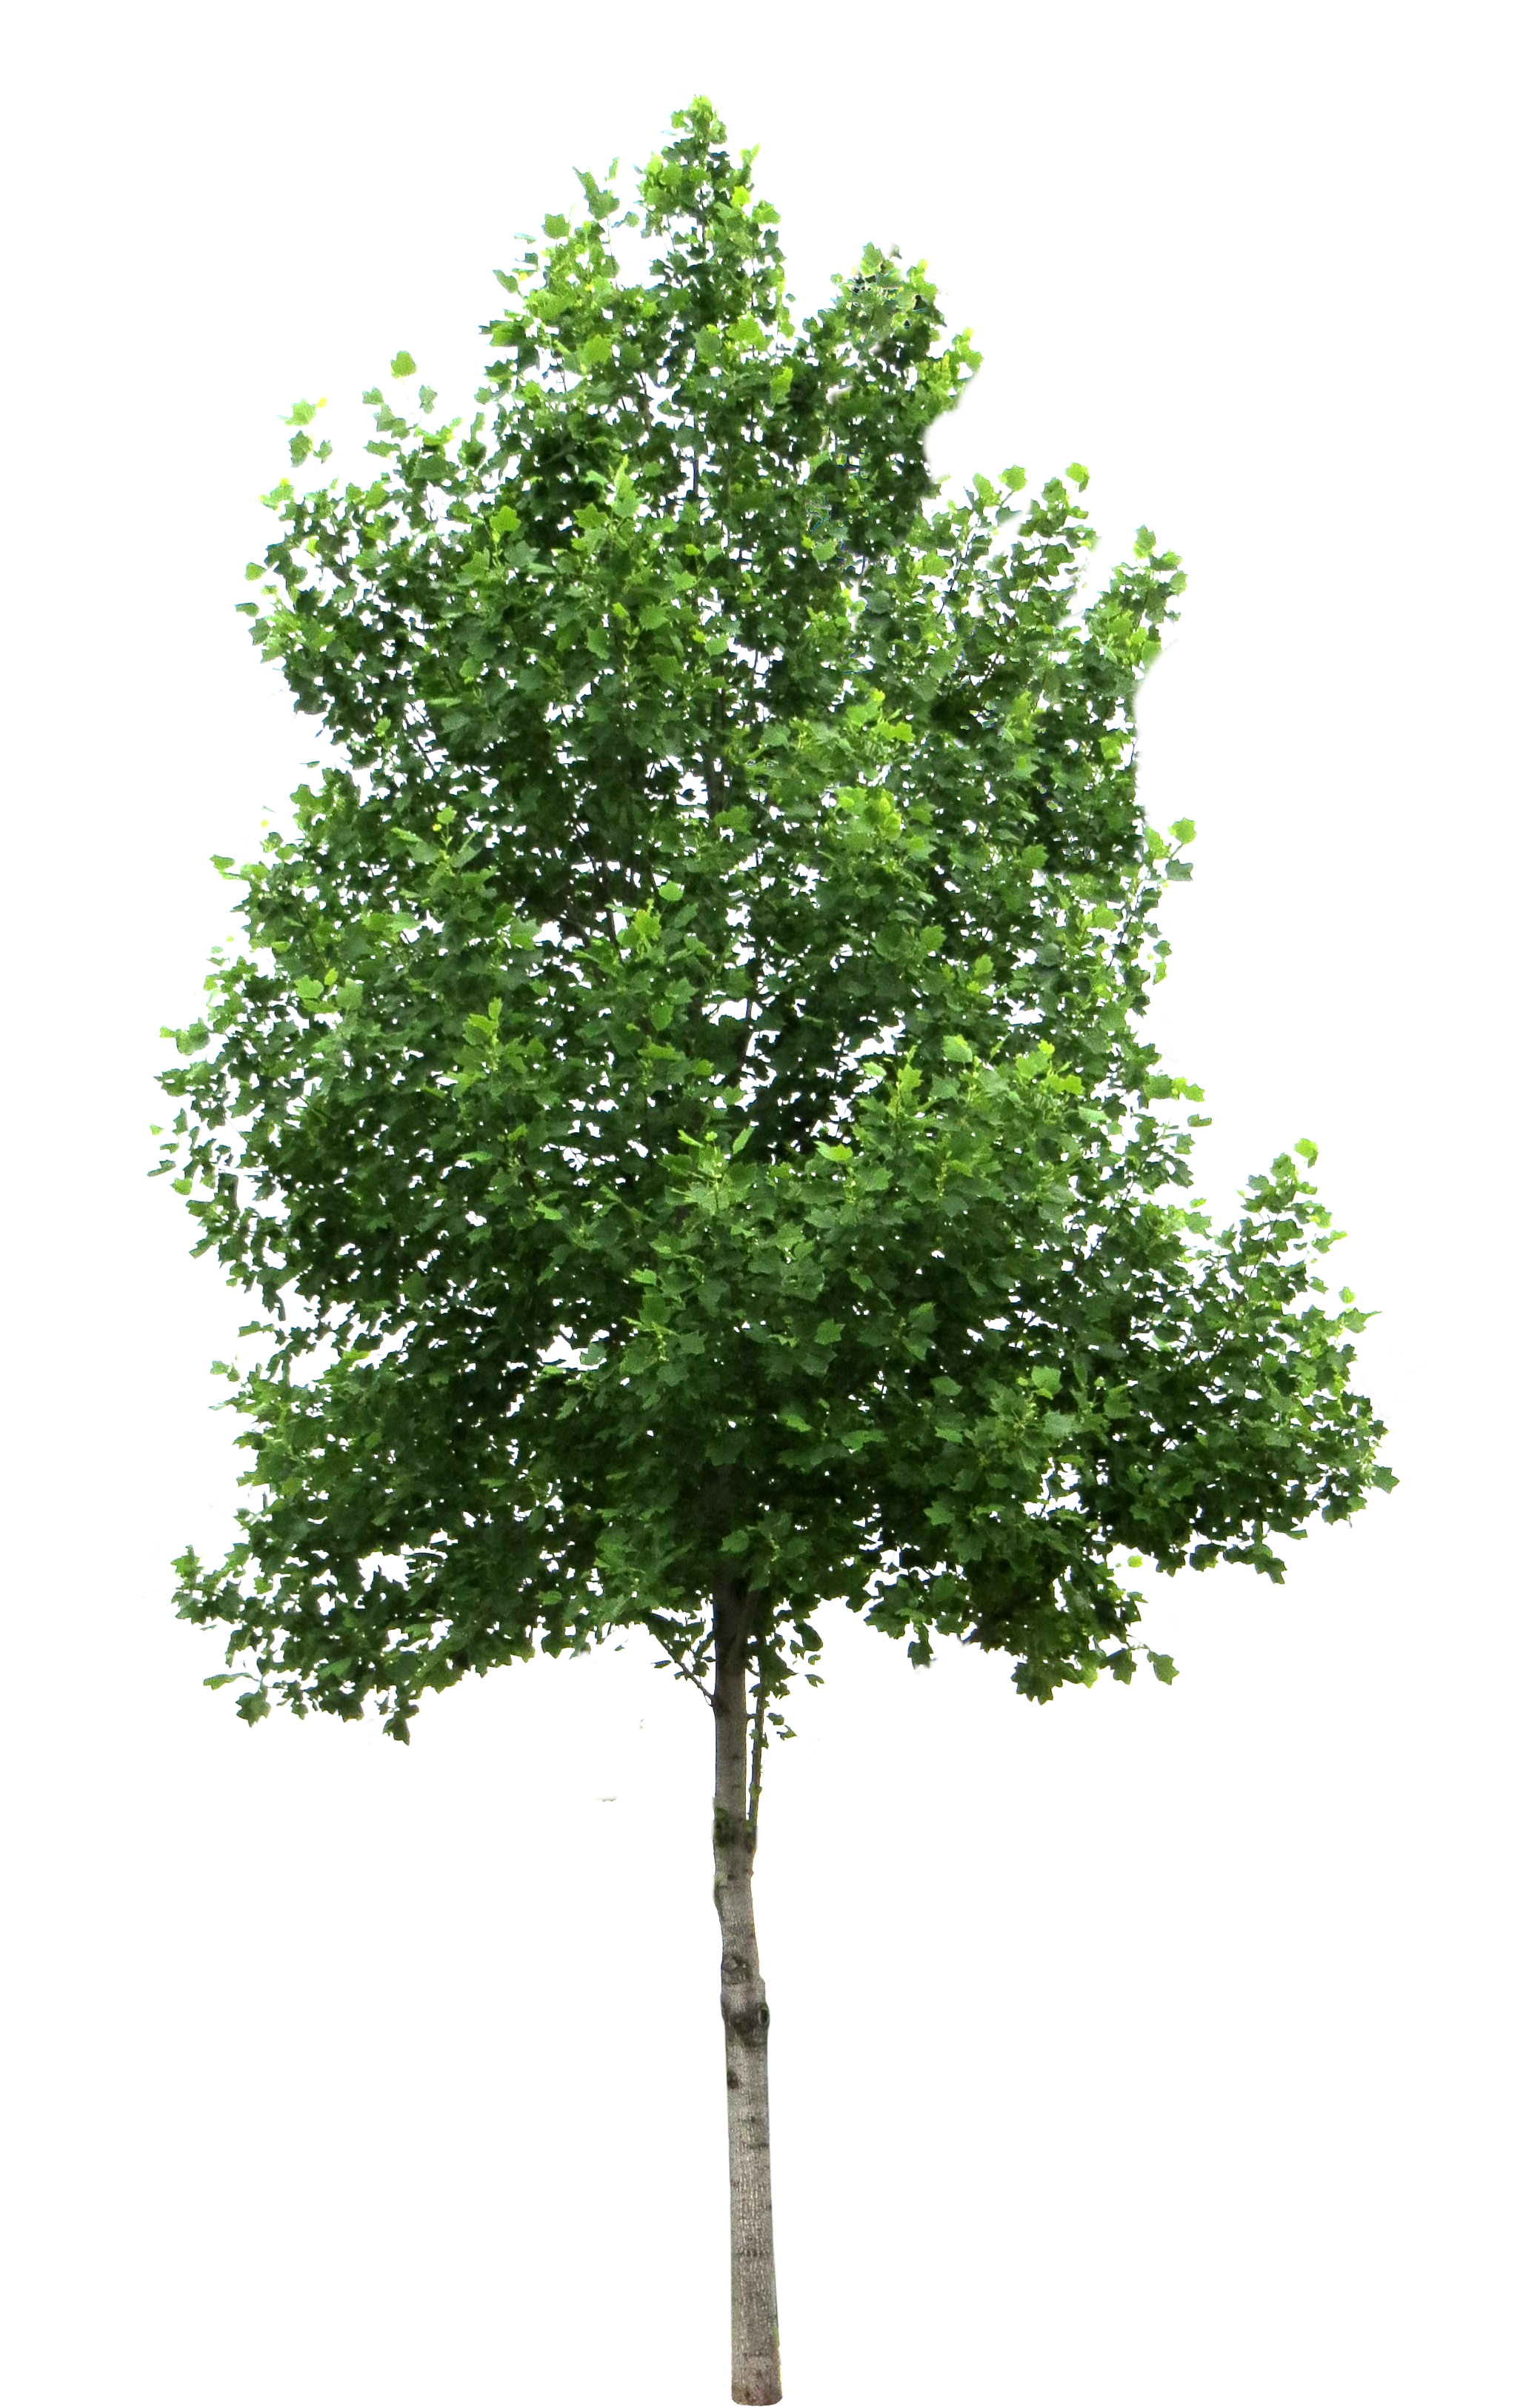 Free texture trees lugher. Plants clipart landscaping